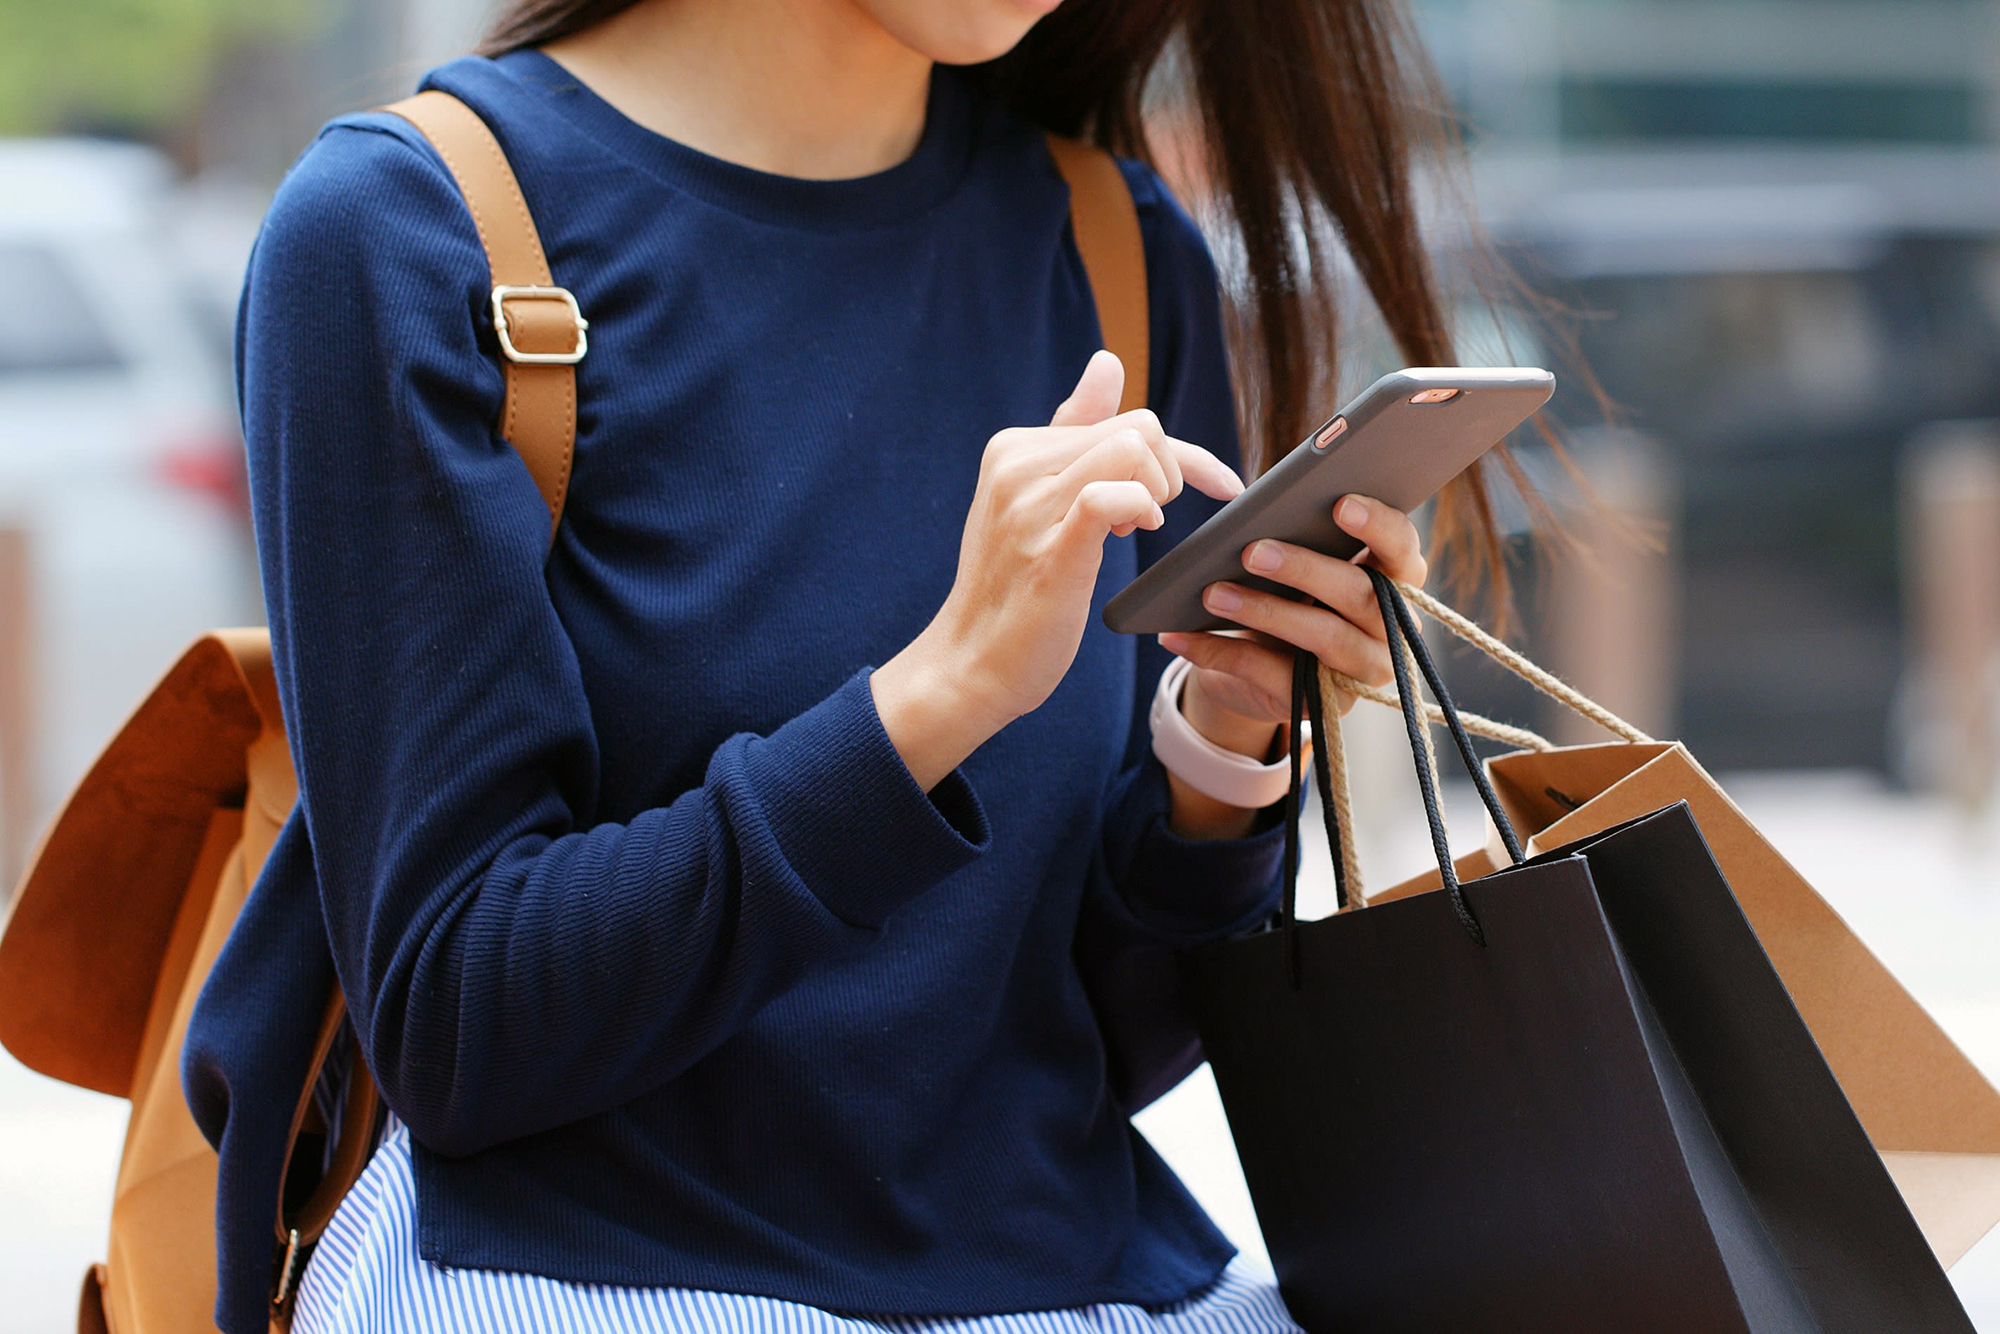 Women using mobile phone while holding shopping bags